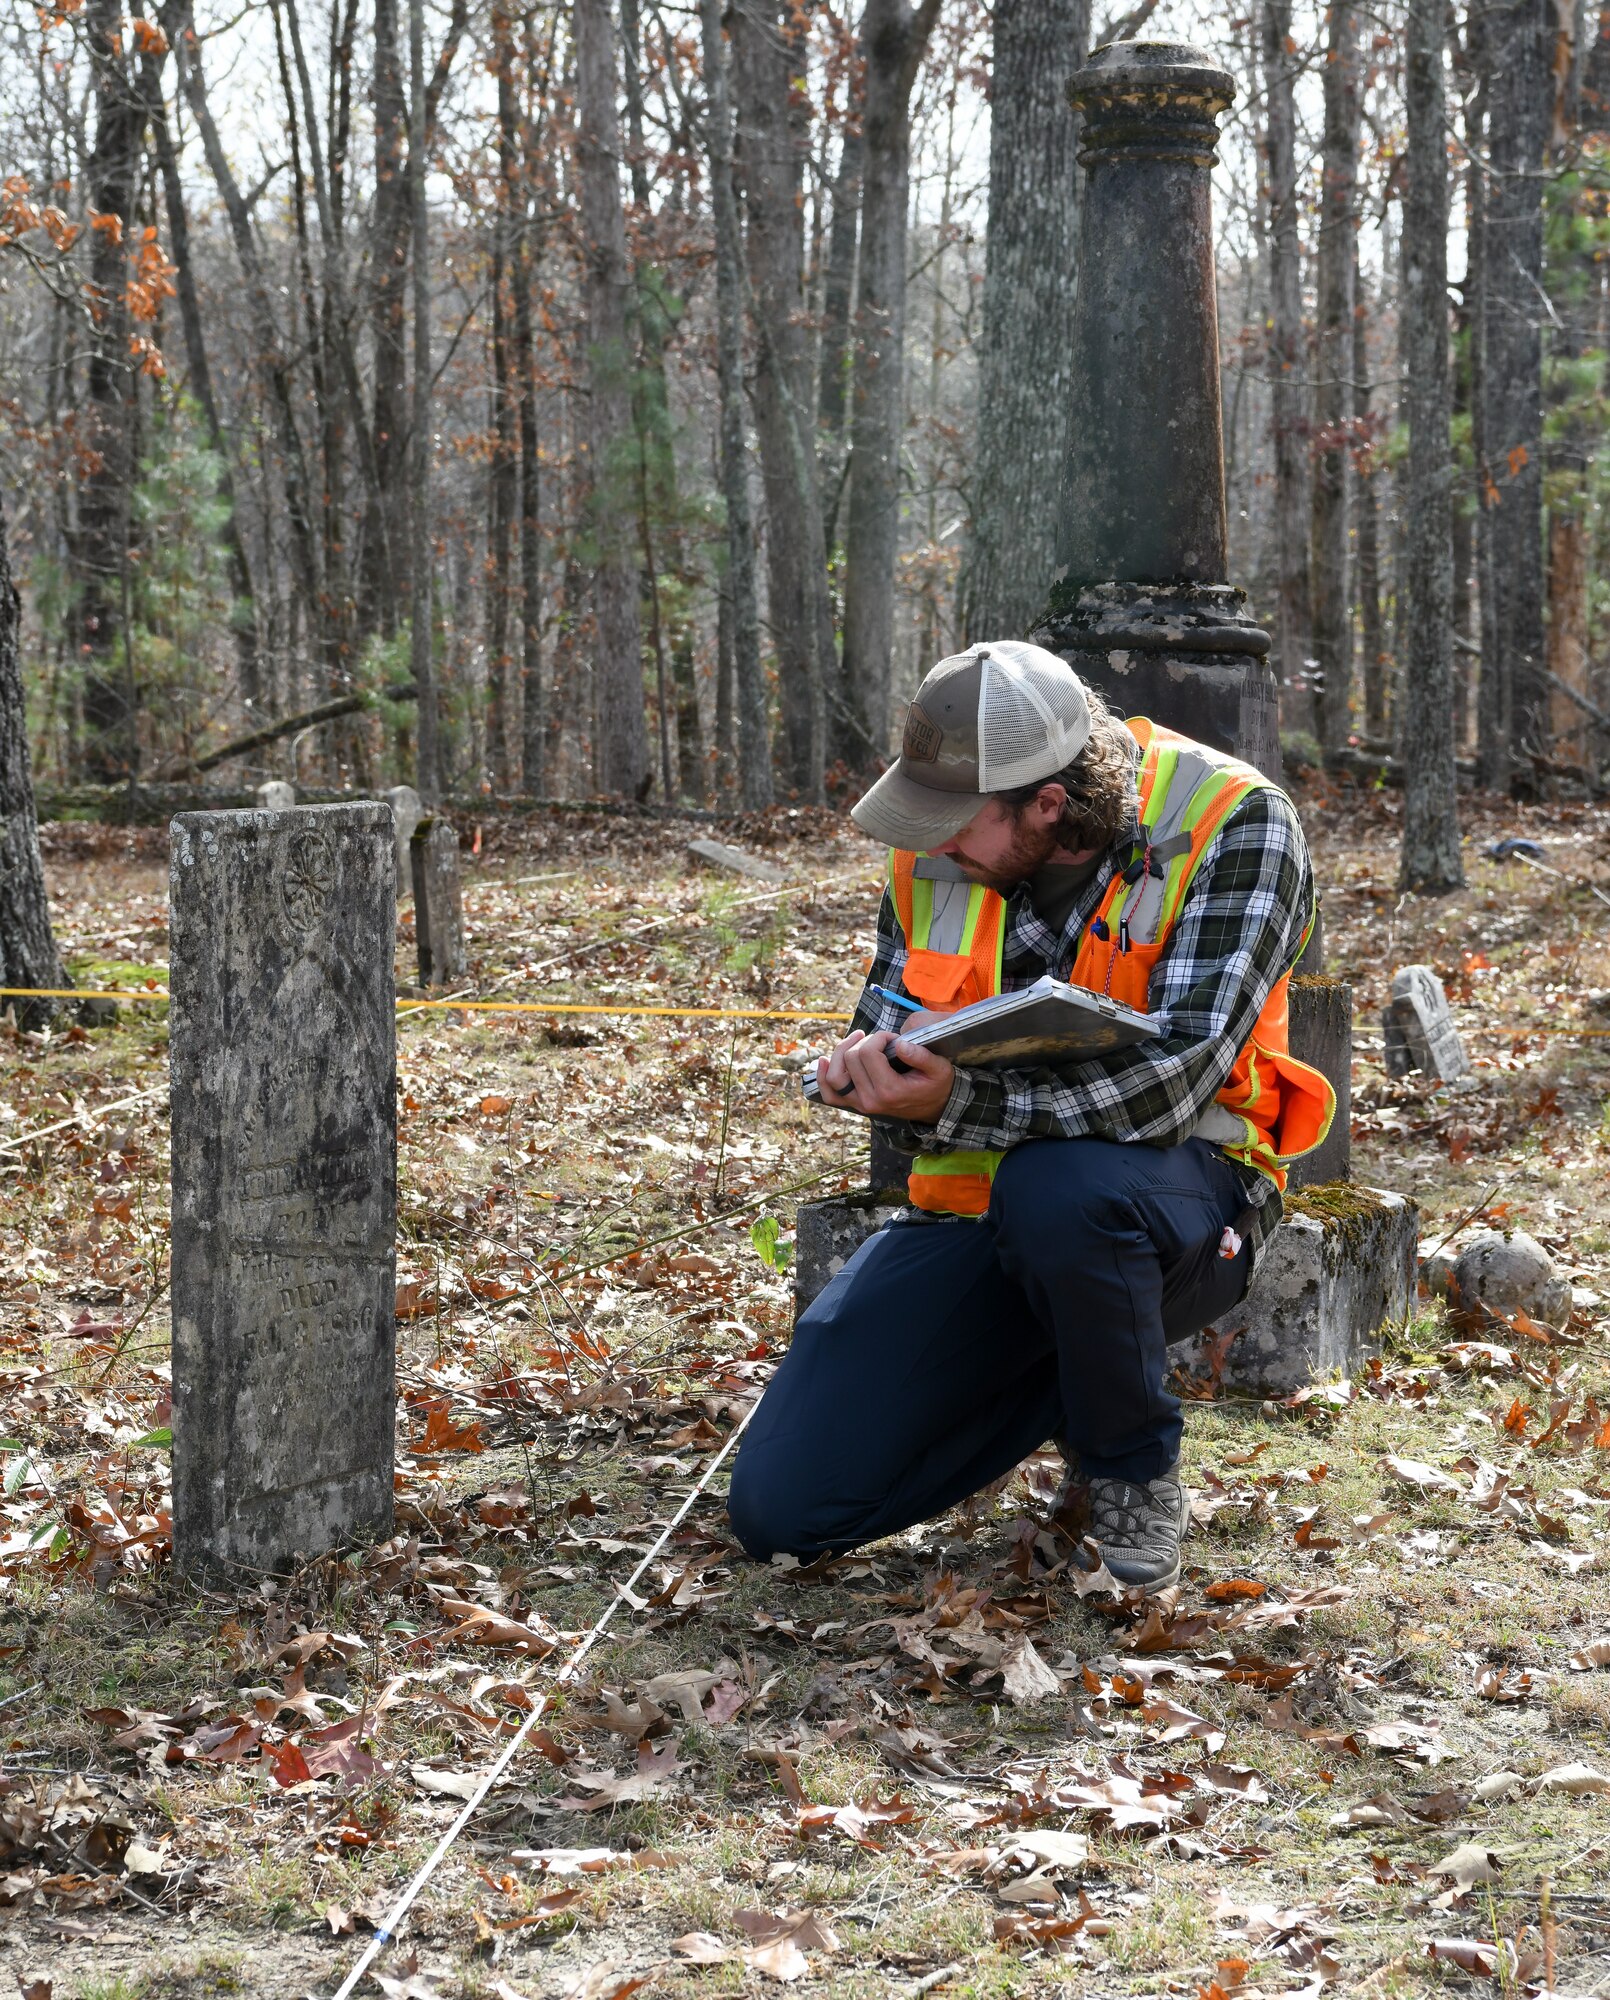 Jacob Jepsen, an archaeologist who specializes in geophysics, looks at one of the grave markers as he maps Chapel Hill Cemetery at Arnold Air Force Base, Tennessee, Nov. 10, 2022. The map is then combined with electrical resistivity and ground penetrating radar data to form a more complete picture of the cemetery. (U.S. Air Force photo by Jill Pickett)